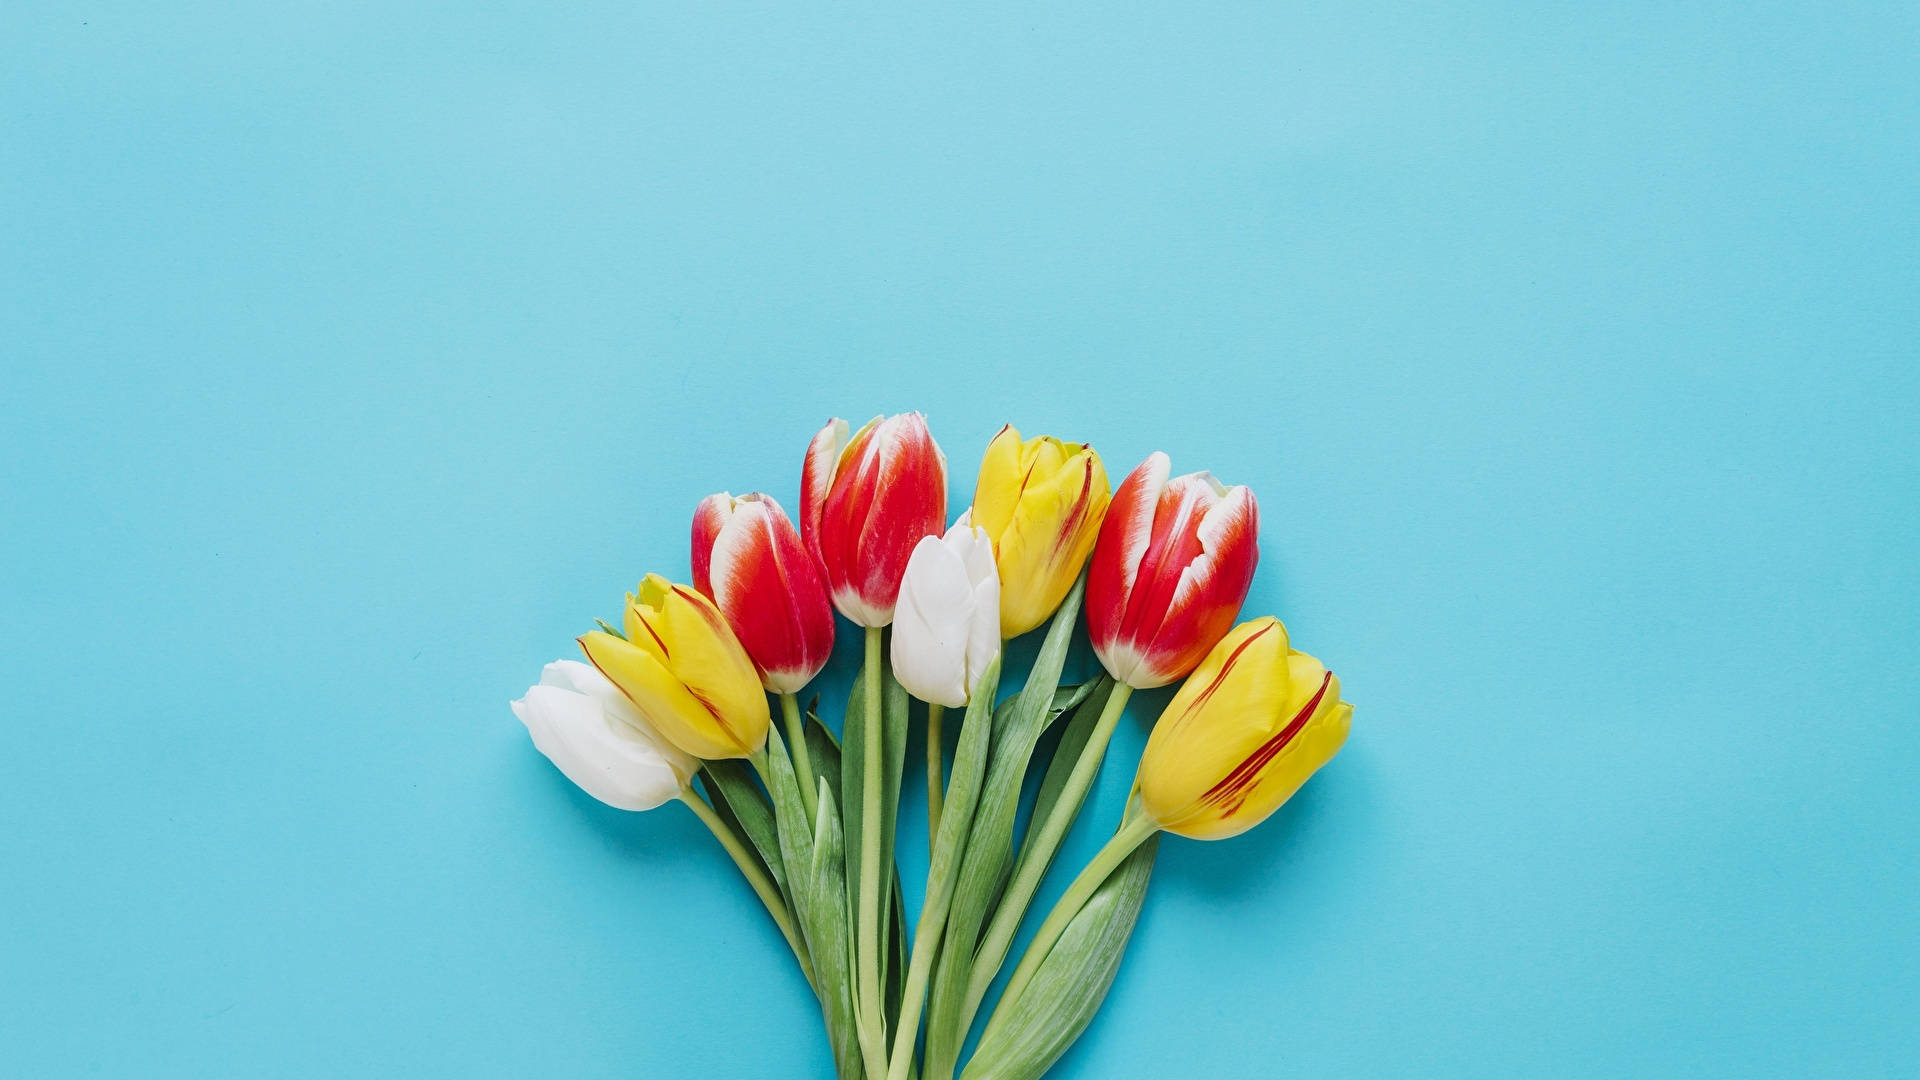 A Bouquet Of Tulips On A Blue Background Wallpaper